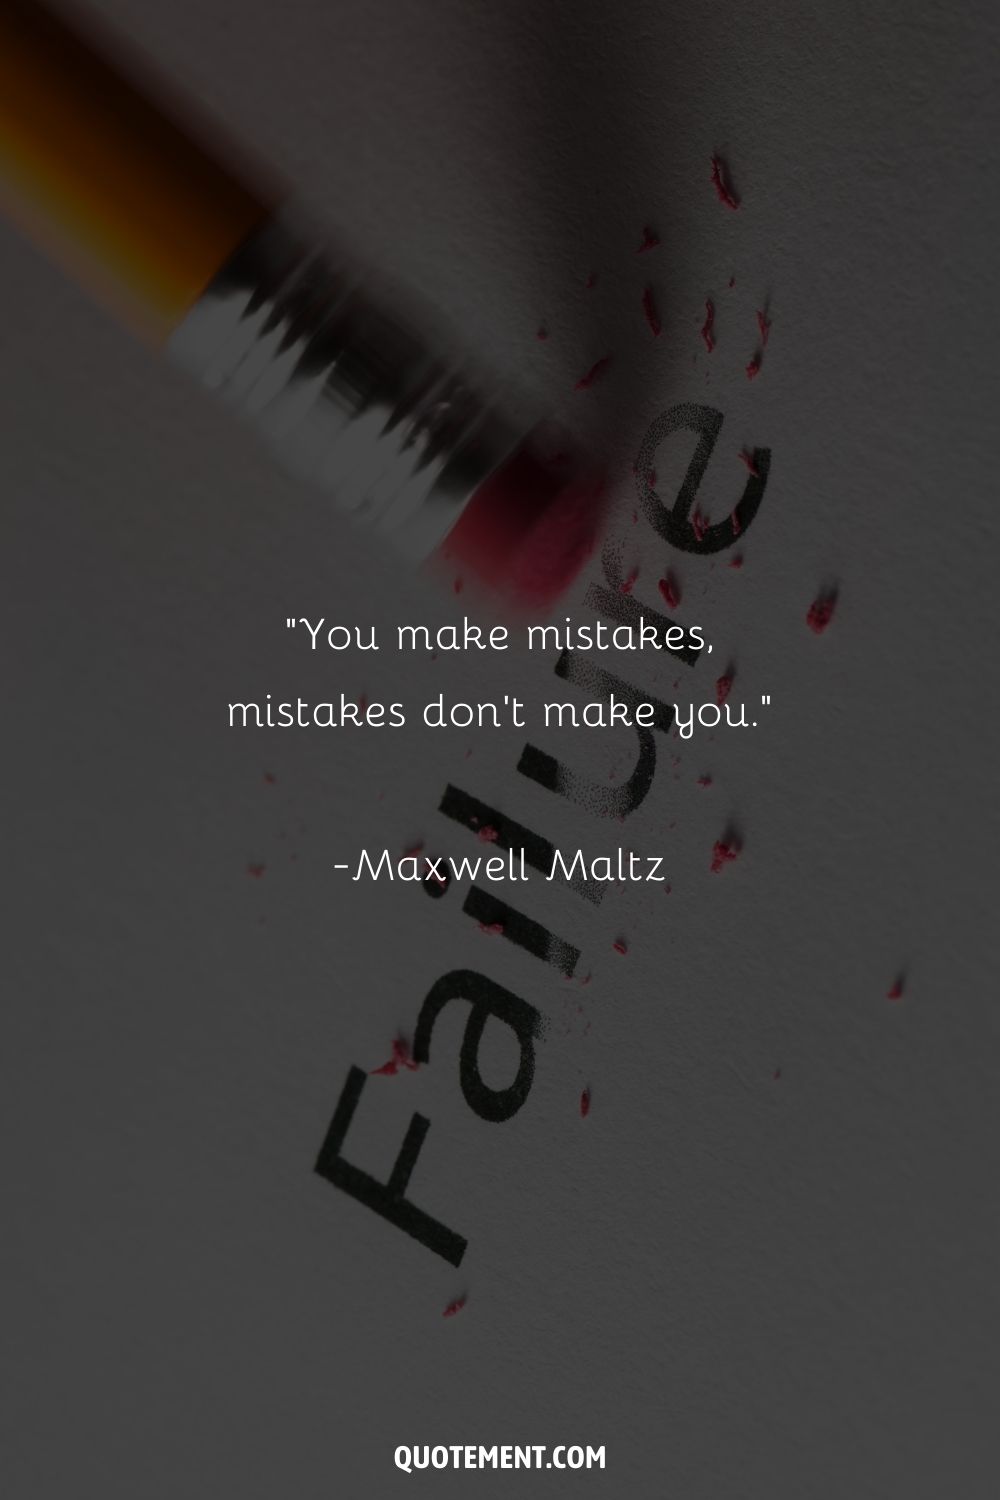 “You make mistakes, mistakes don't make you” ― Maxwell Maltz